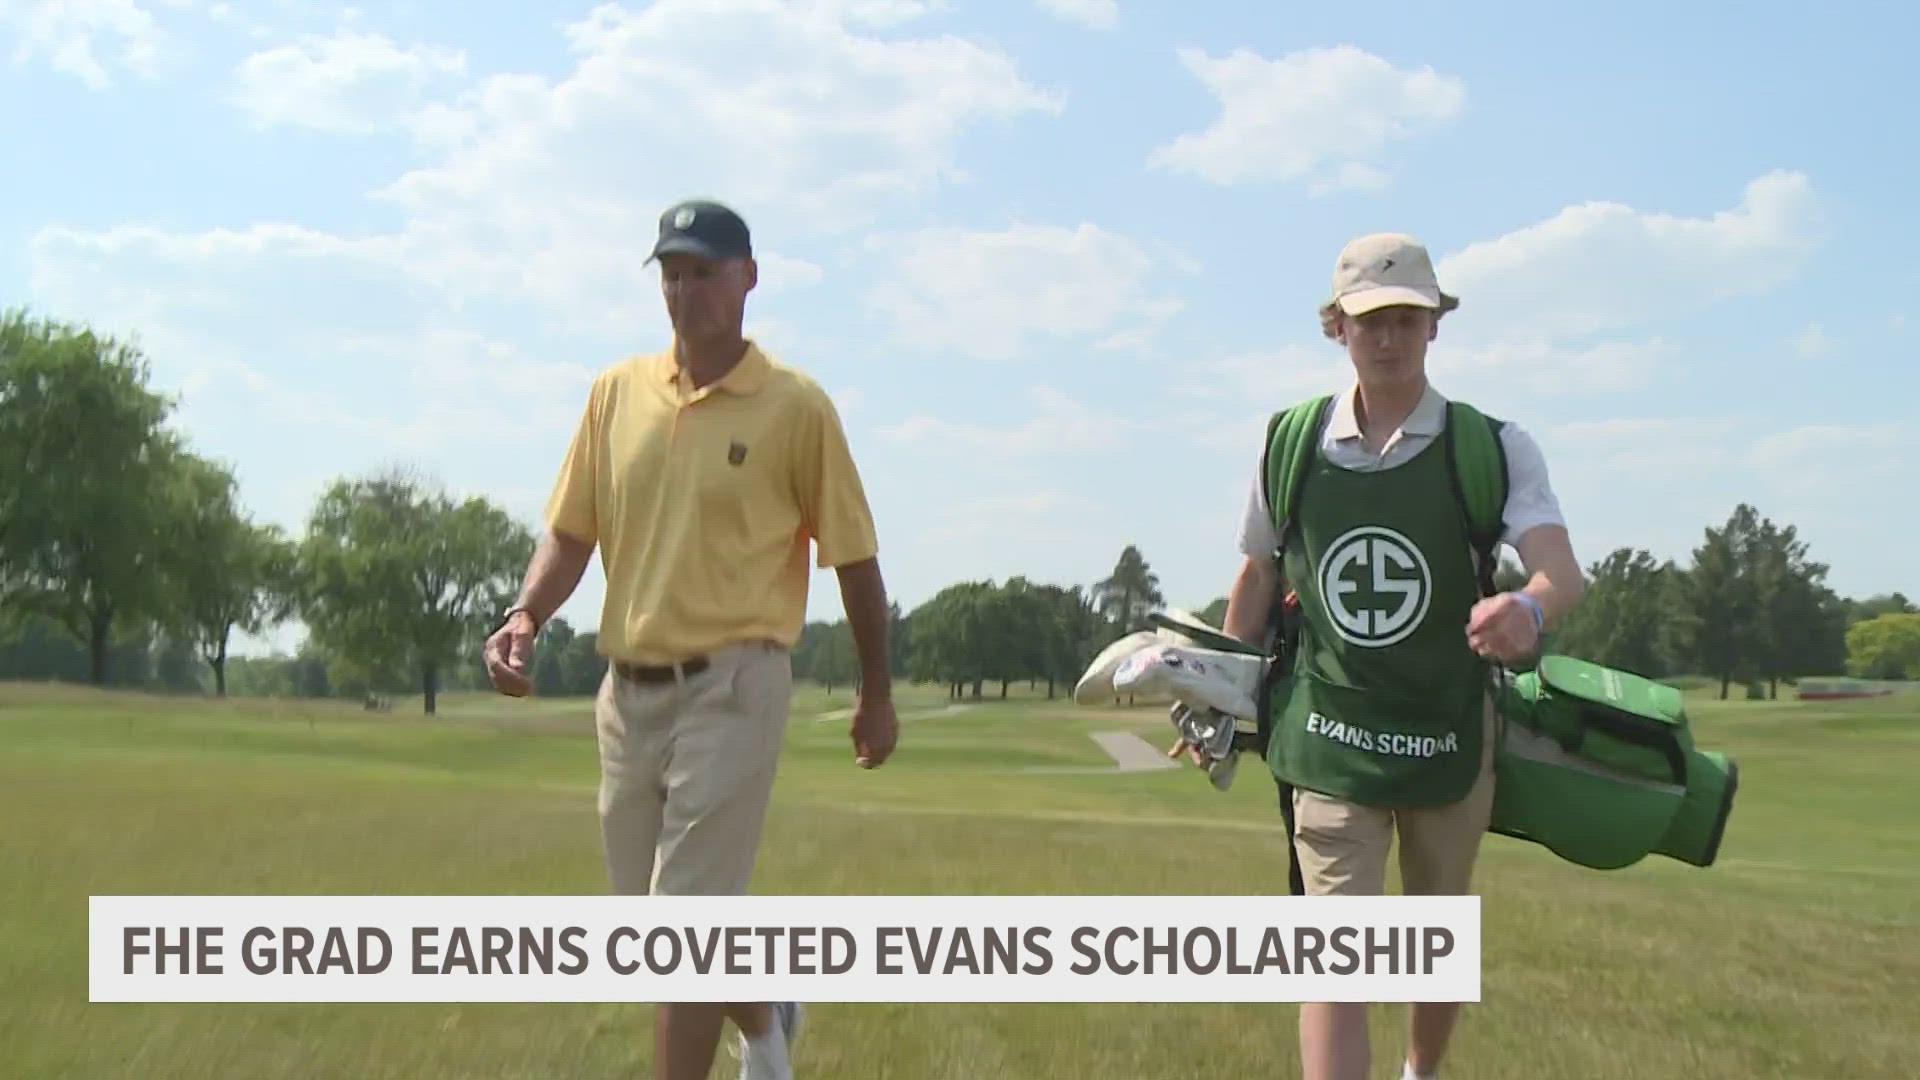 Local student earns coveted Evans Scholarship